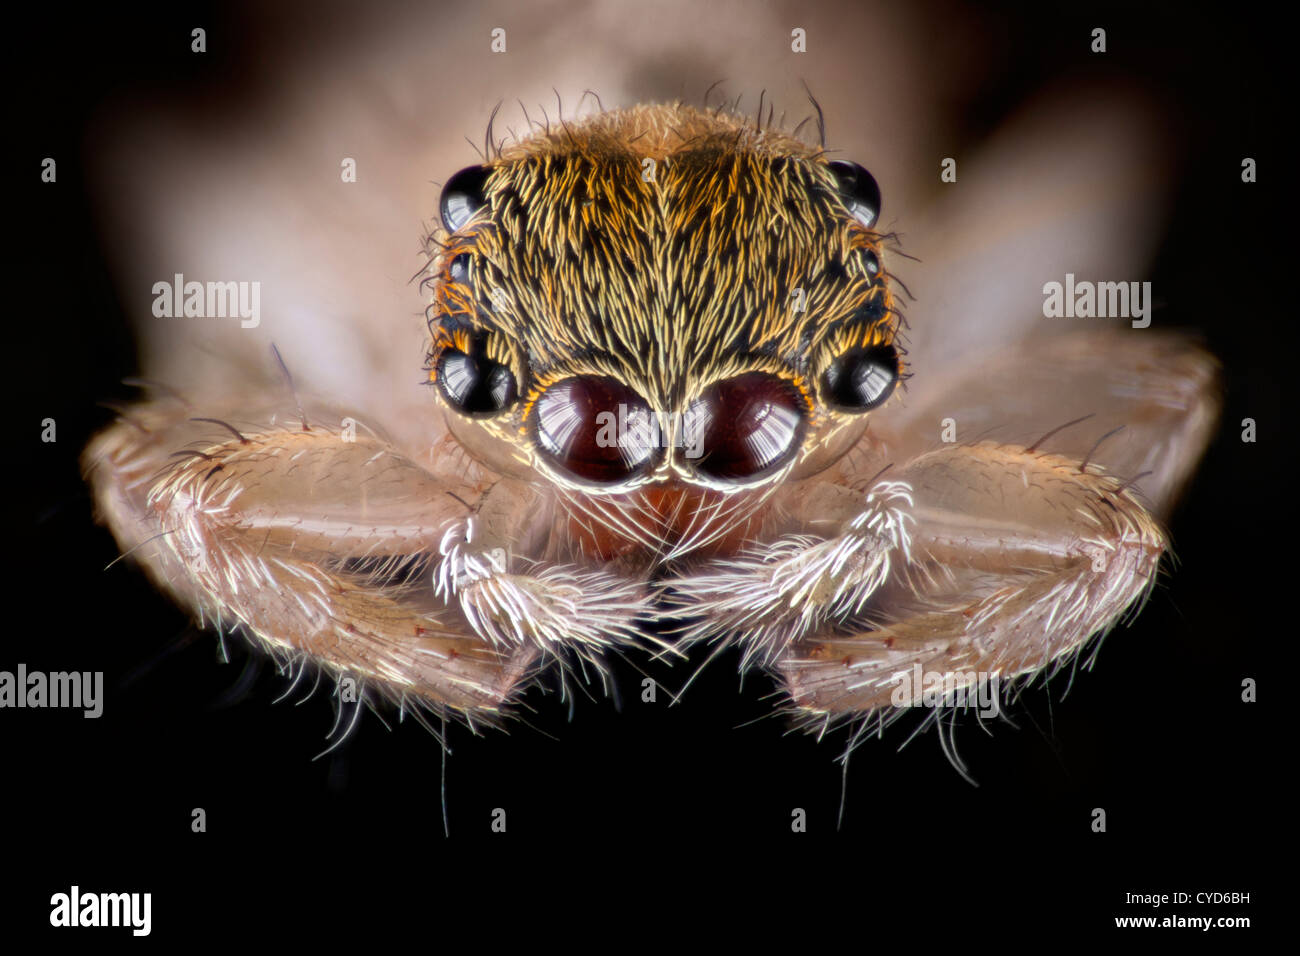 High macro photograph of a Malaysian jumping spider, showing the many eyes. Possibly Telamonia sp. Stock Photo